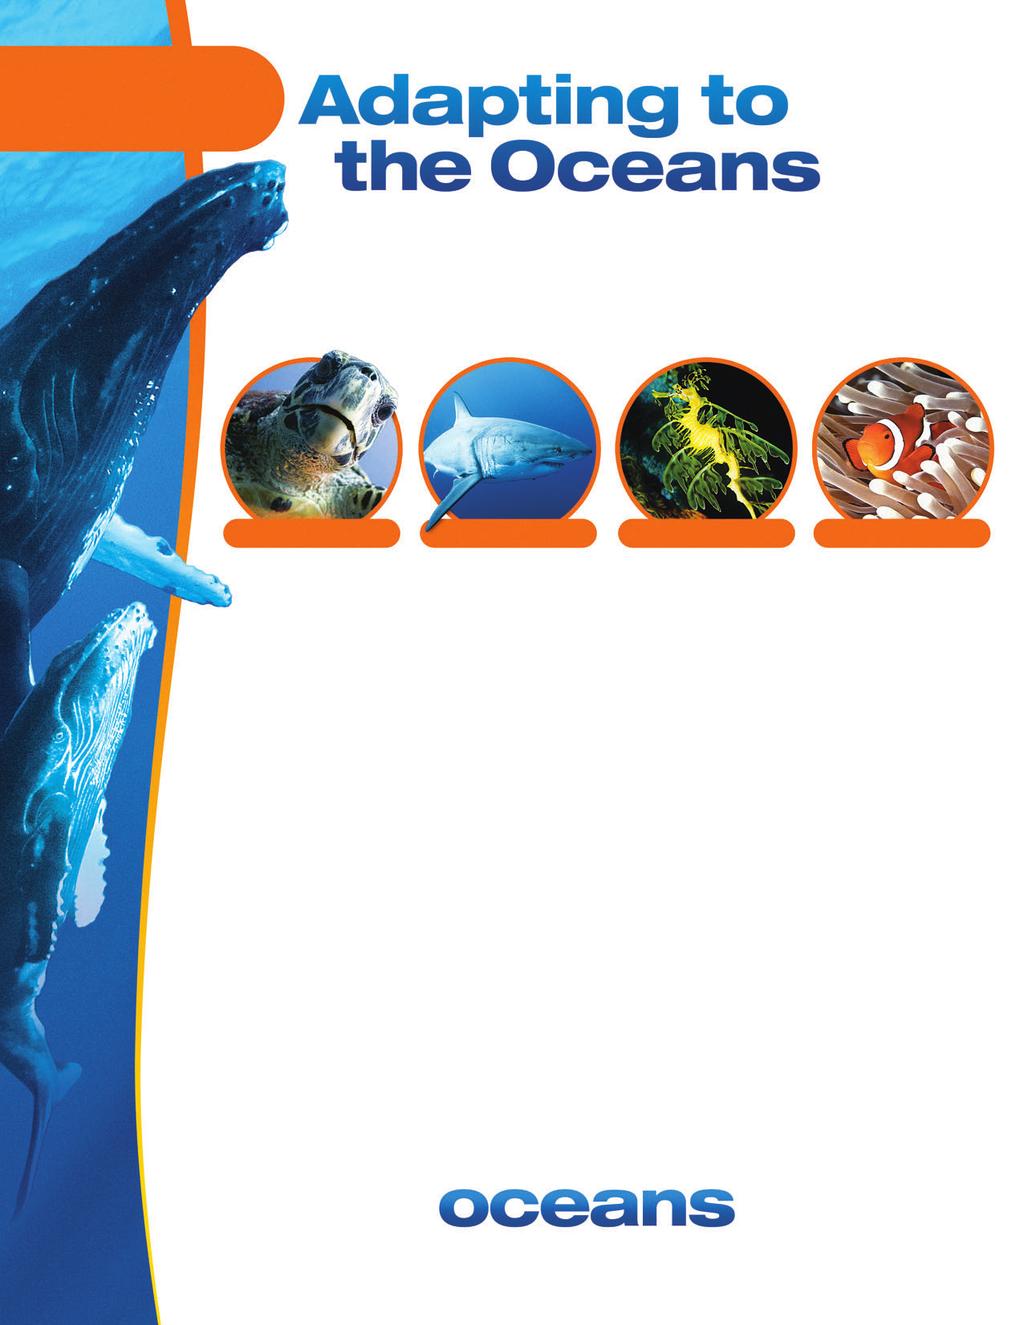 ACTIVITY 3 In the Disneynature film OCEANS you visit a coral reef. The animals that live in a coral reef have adaptations that allow them to survive there.